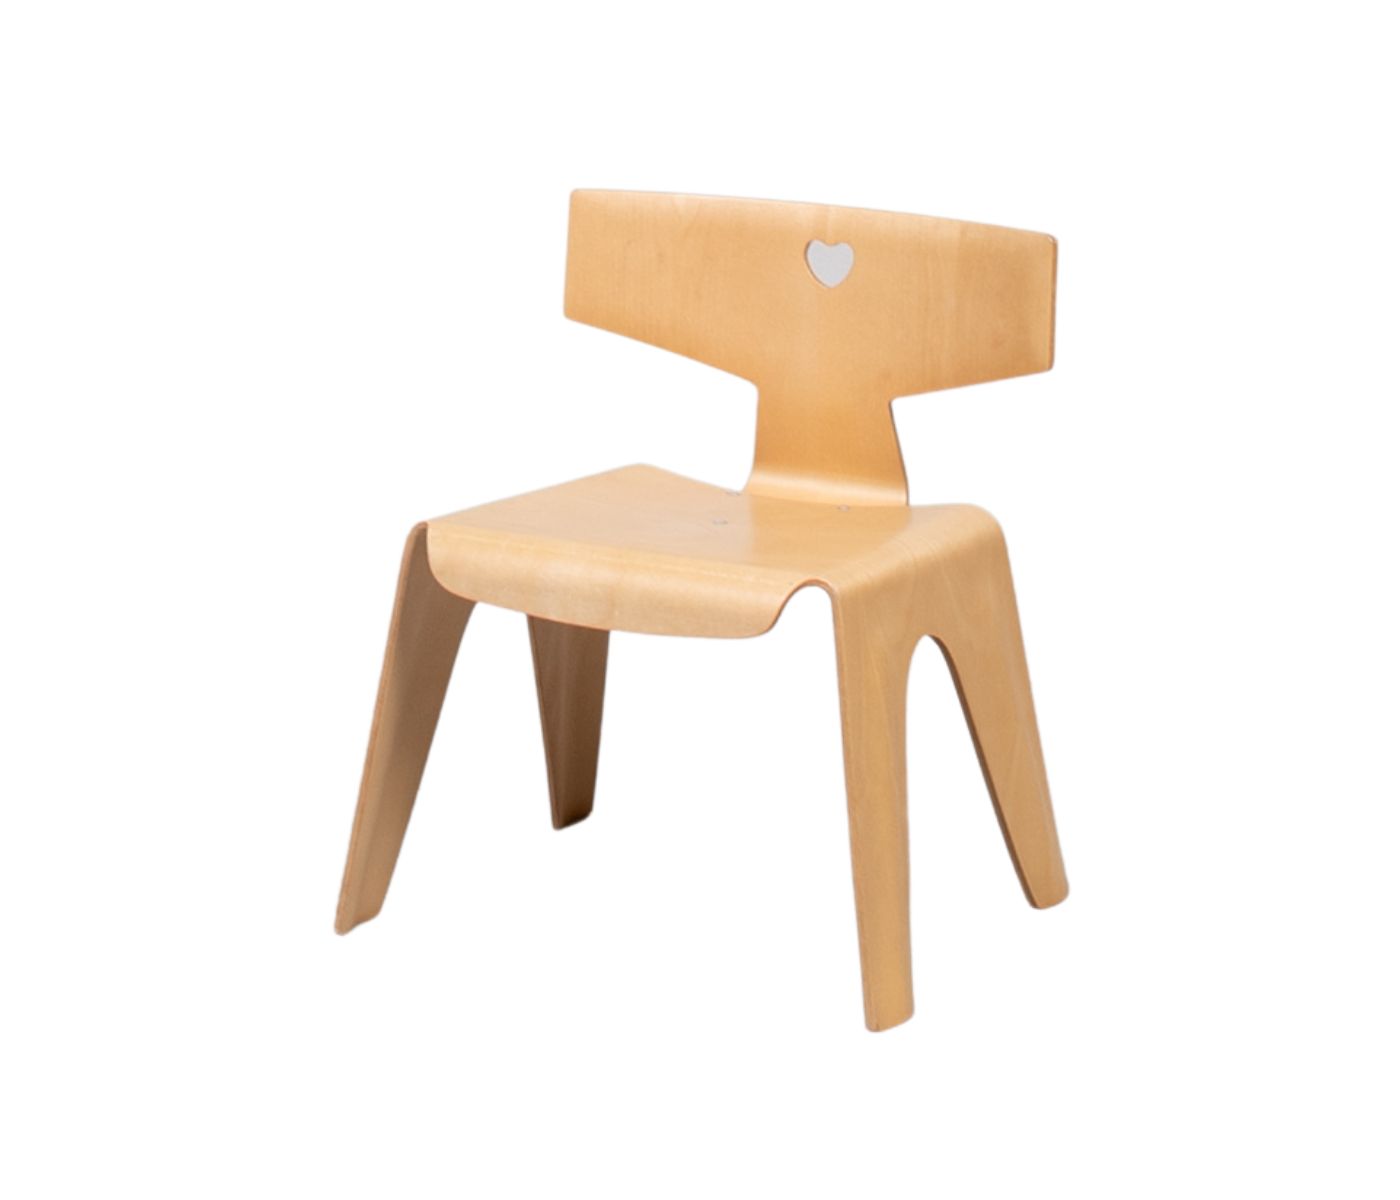 Vitra Eames Children’s Chair helles Holz